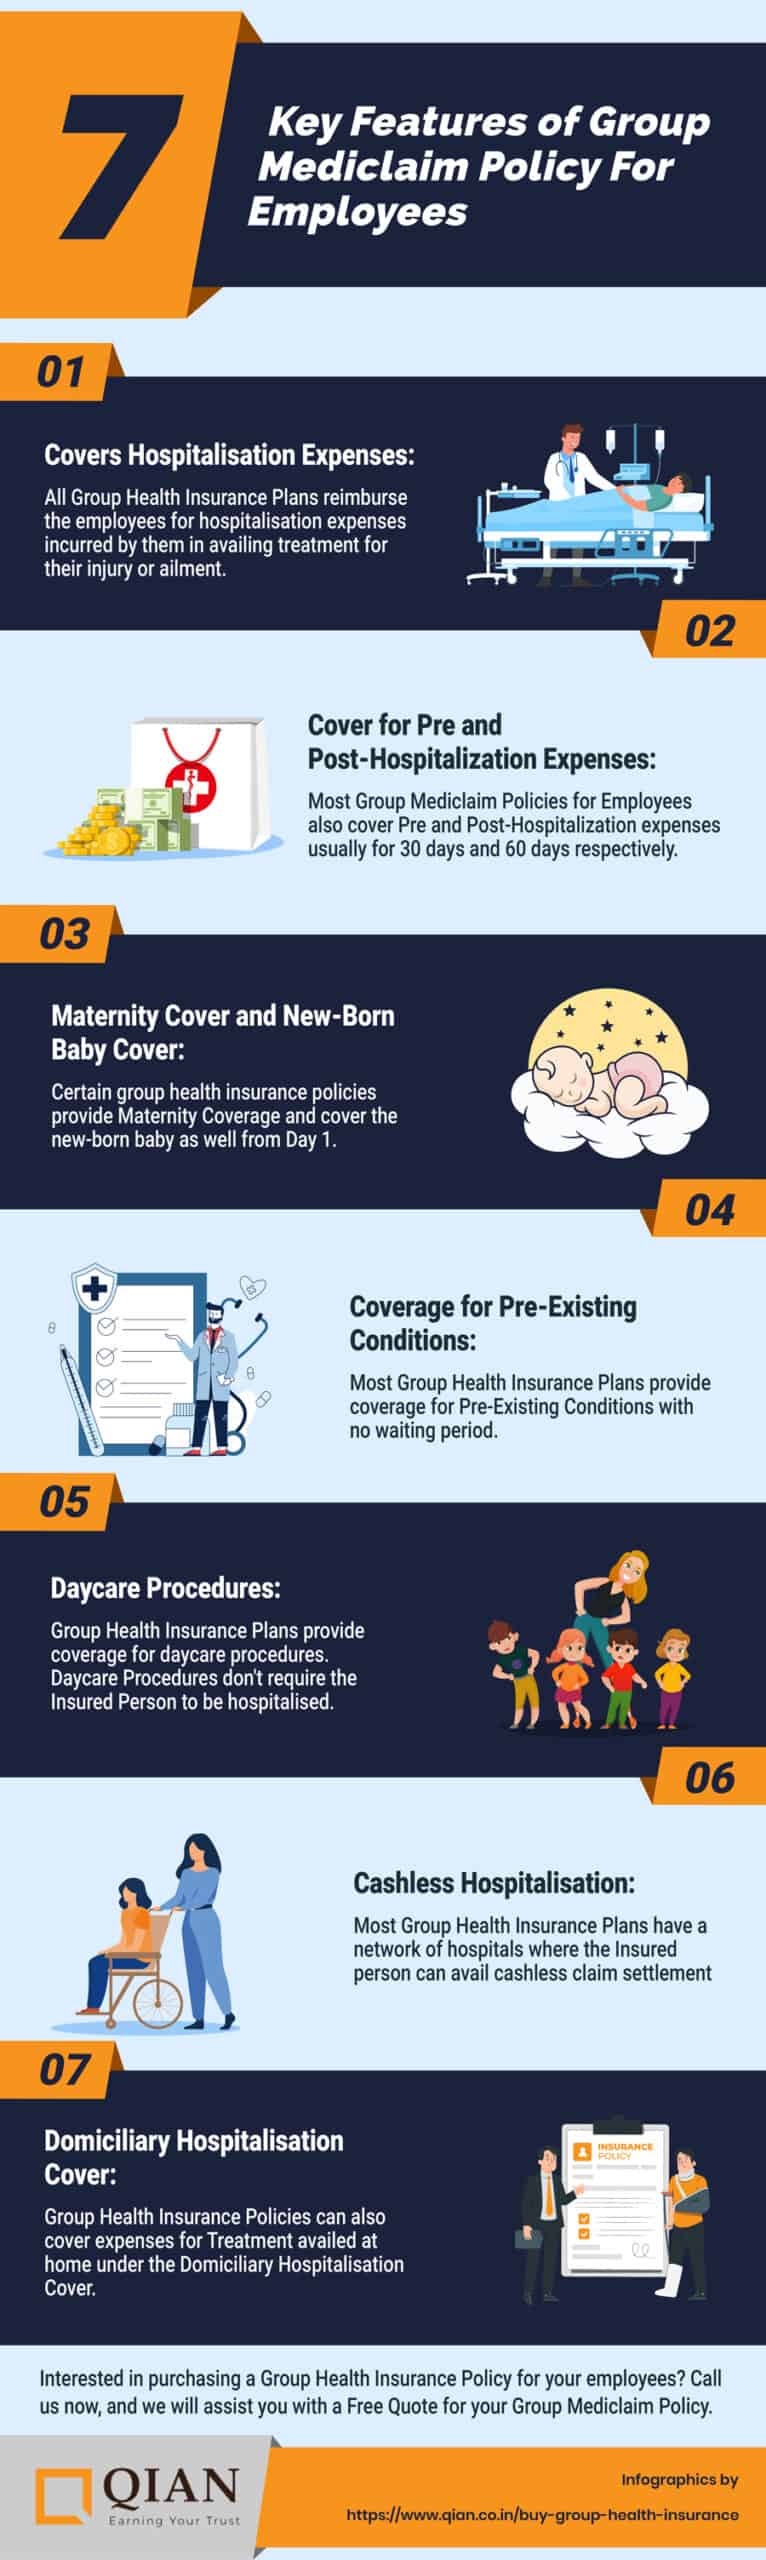 Group Mediclaim Policy For Employees infographic